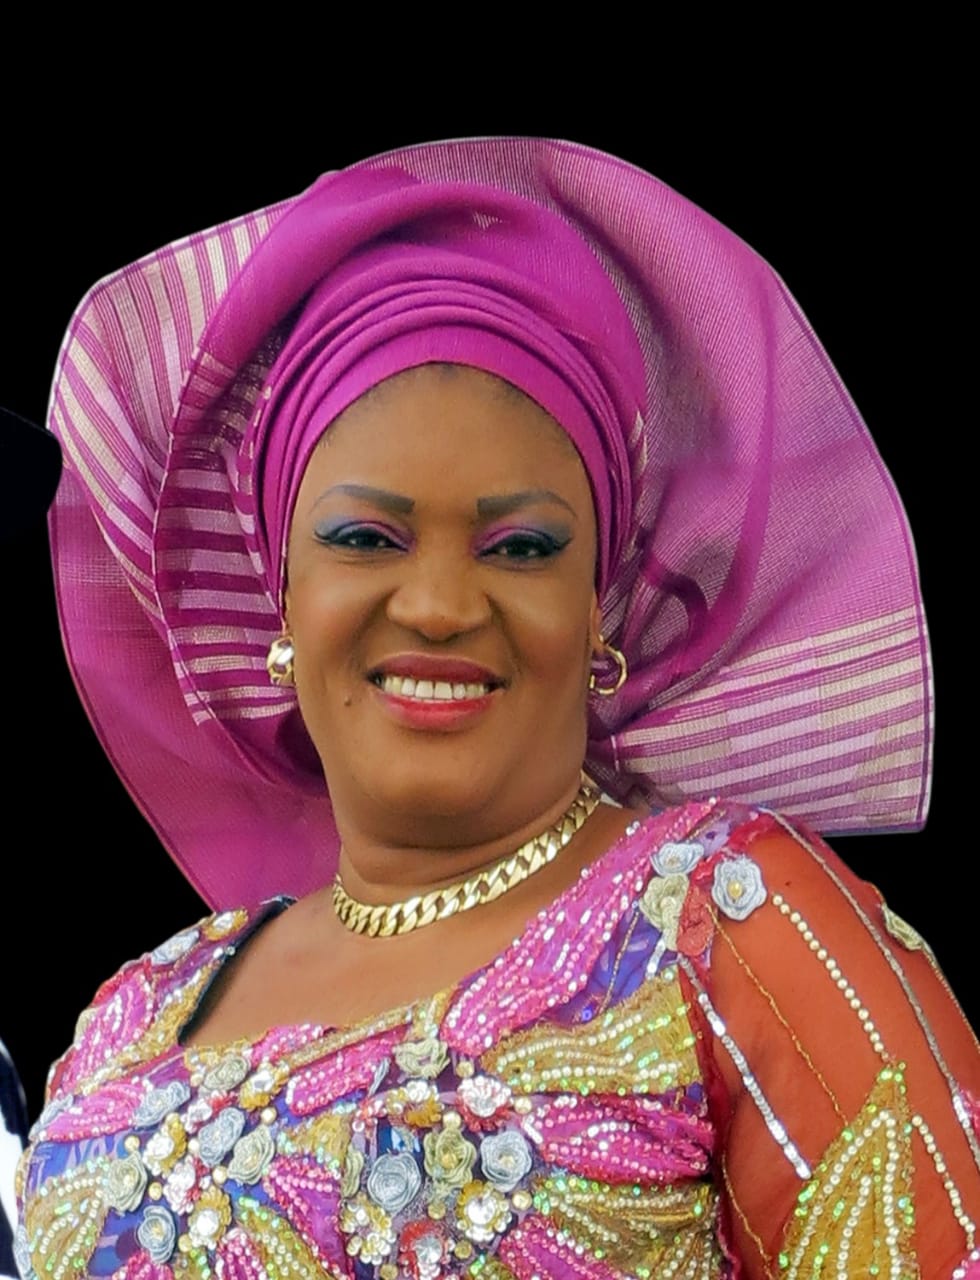 Pay close attention to your children’s lifestyle, save them from crimes – Umahi’s wife